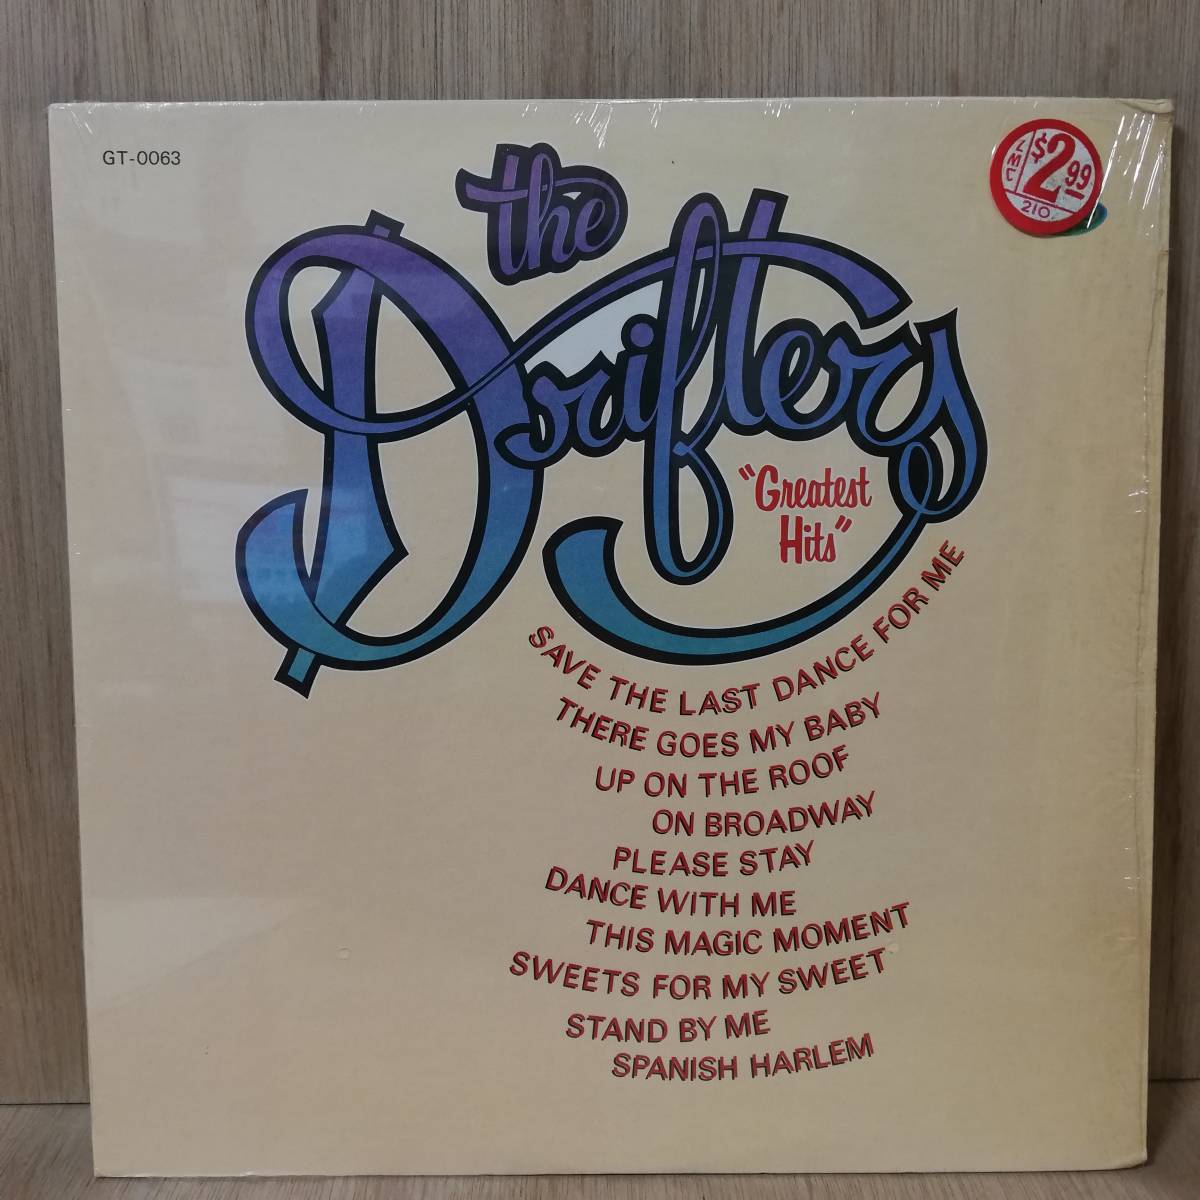 【LP】US盤 - The Drifters Greatest Hits - GT-0063 - *15_画像1